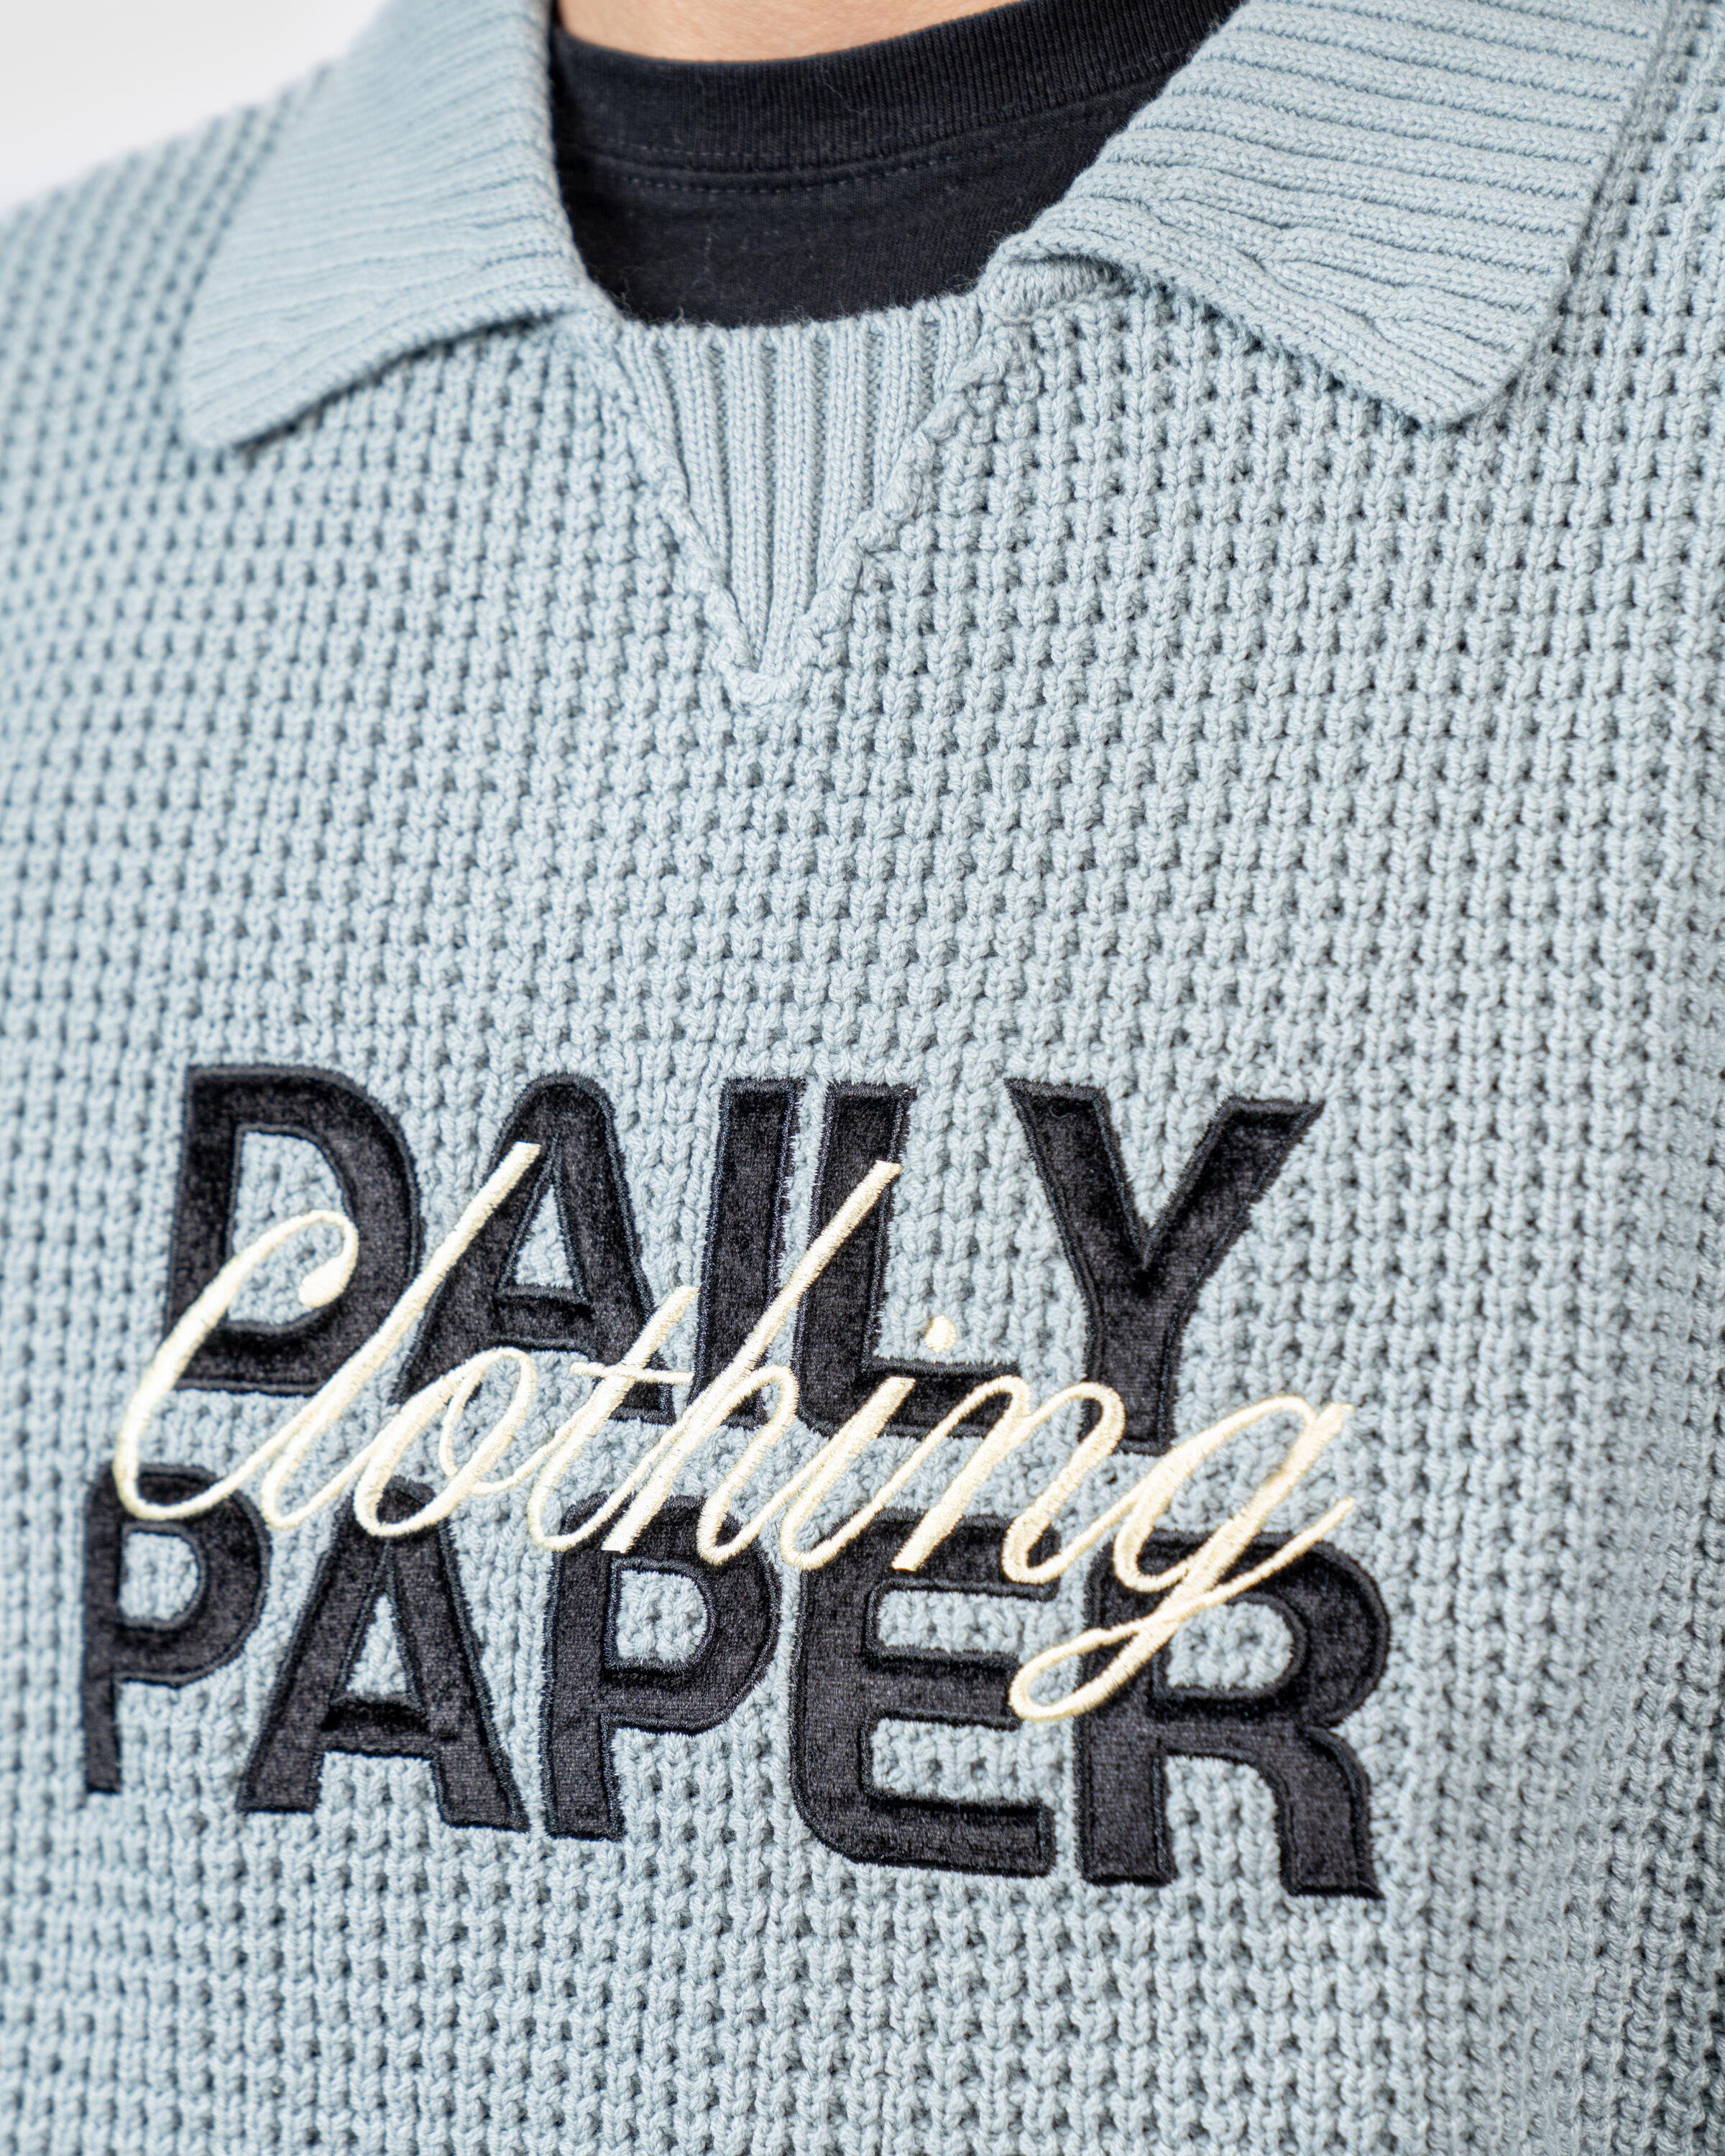 Daily Paper hubaab sweater